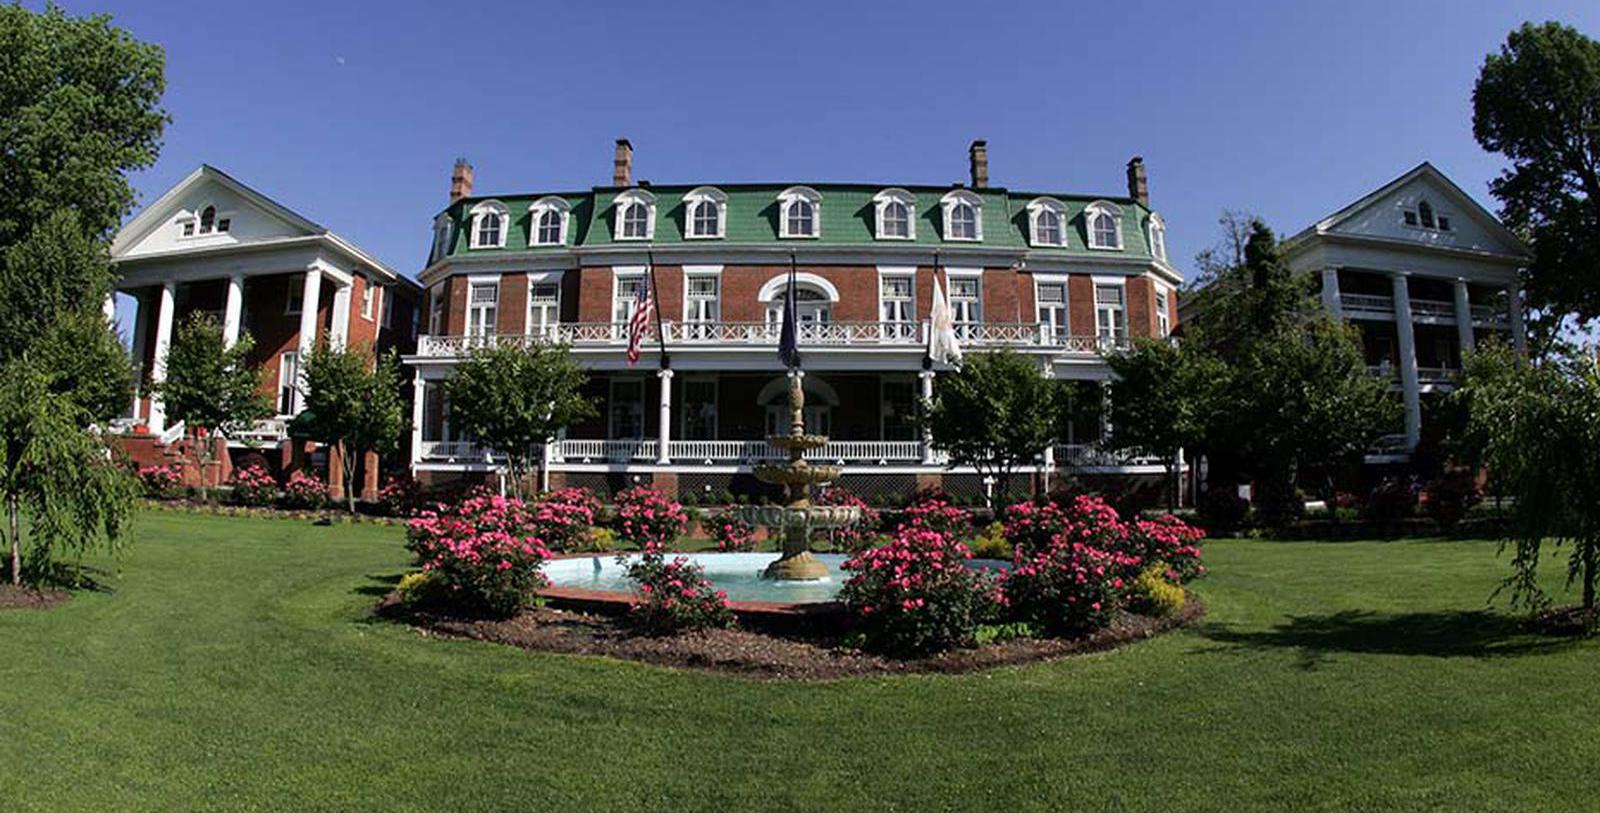 Image of Hotel Exterior The Martha Washington Hotel & Spa, 1832, Member of Historic Hotels of America, in Abingdon, Virginia, Special Offers, Discounted Rates, Families, Romantic Escape, Honeymoons, Anniversaries, Reunions